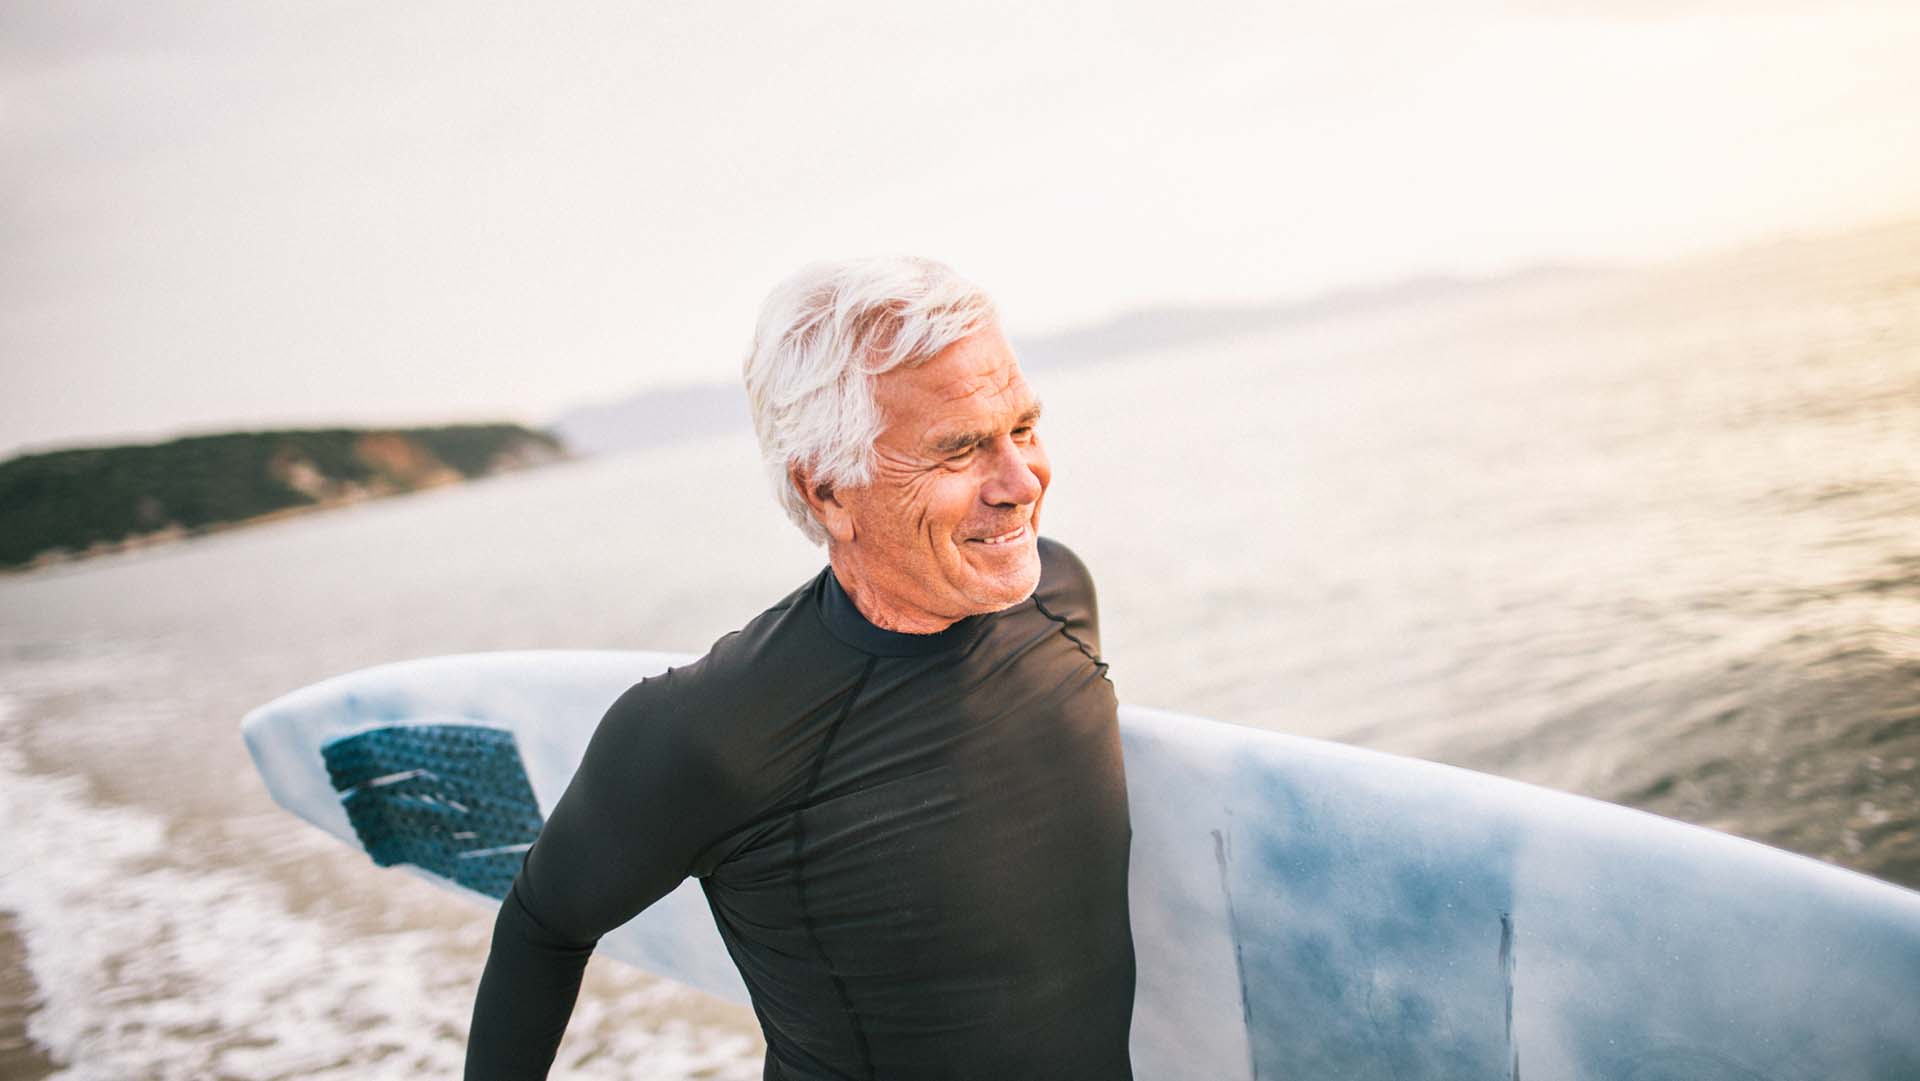 Portrait of a senior surfer holding his surfboard, being satisfied after a good surfing day